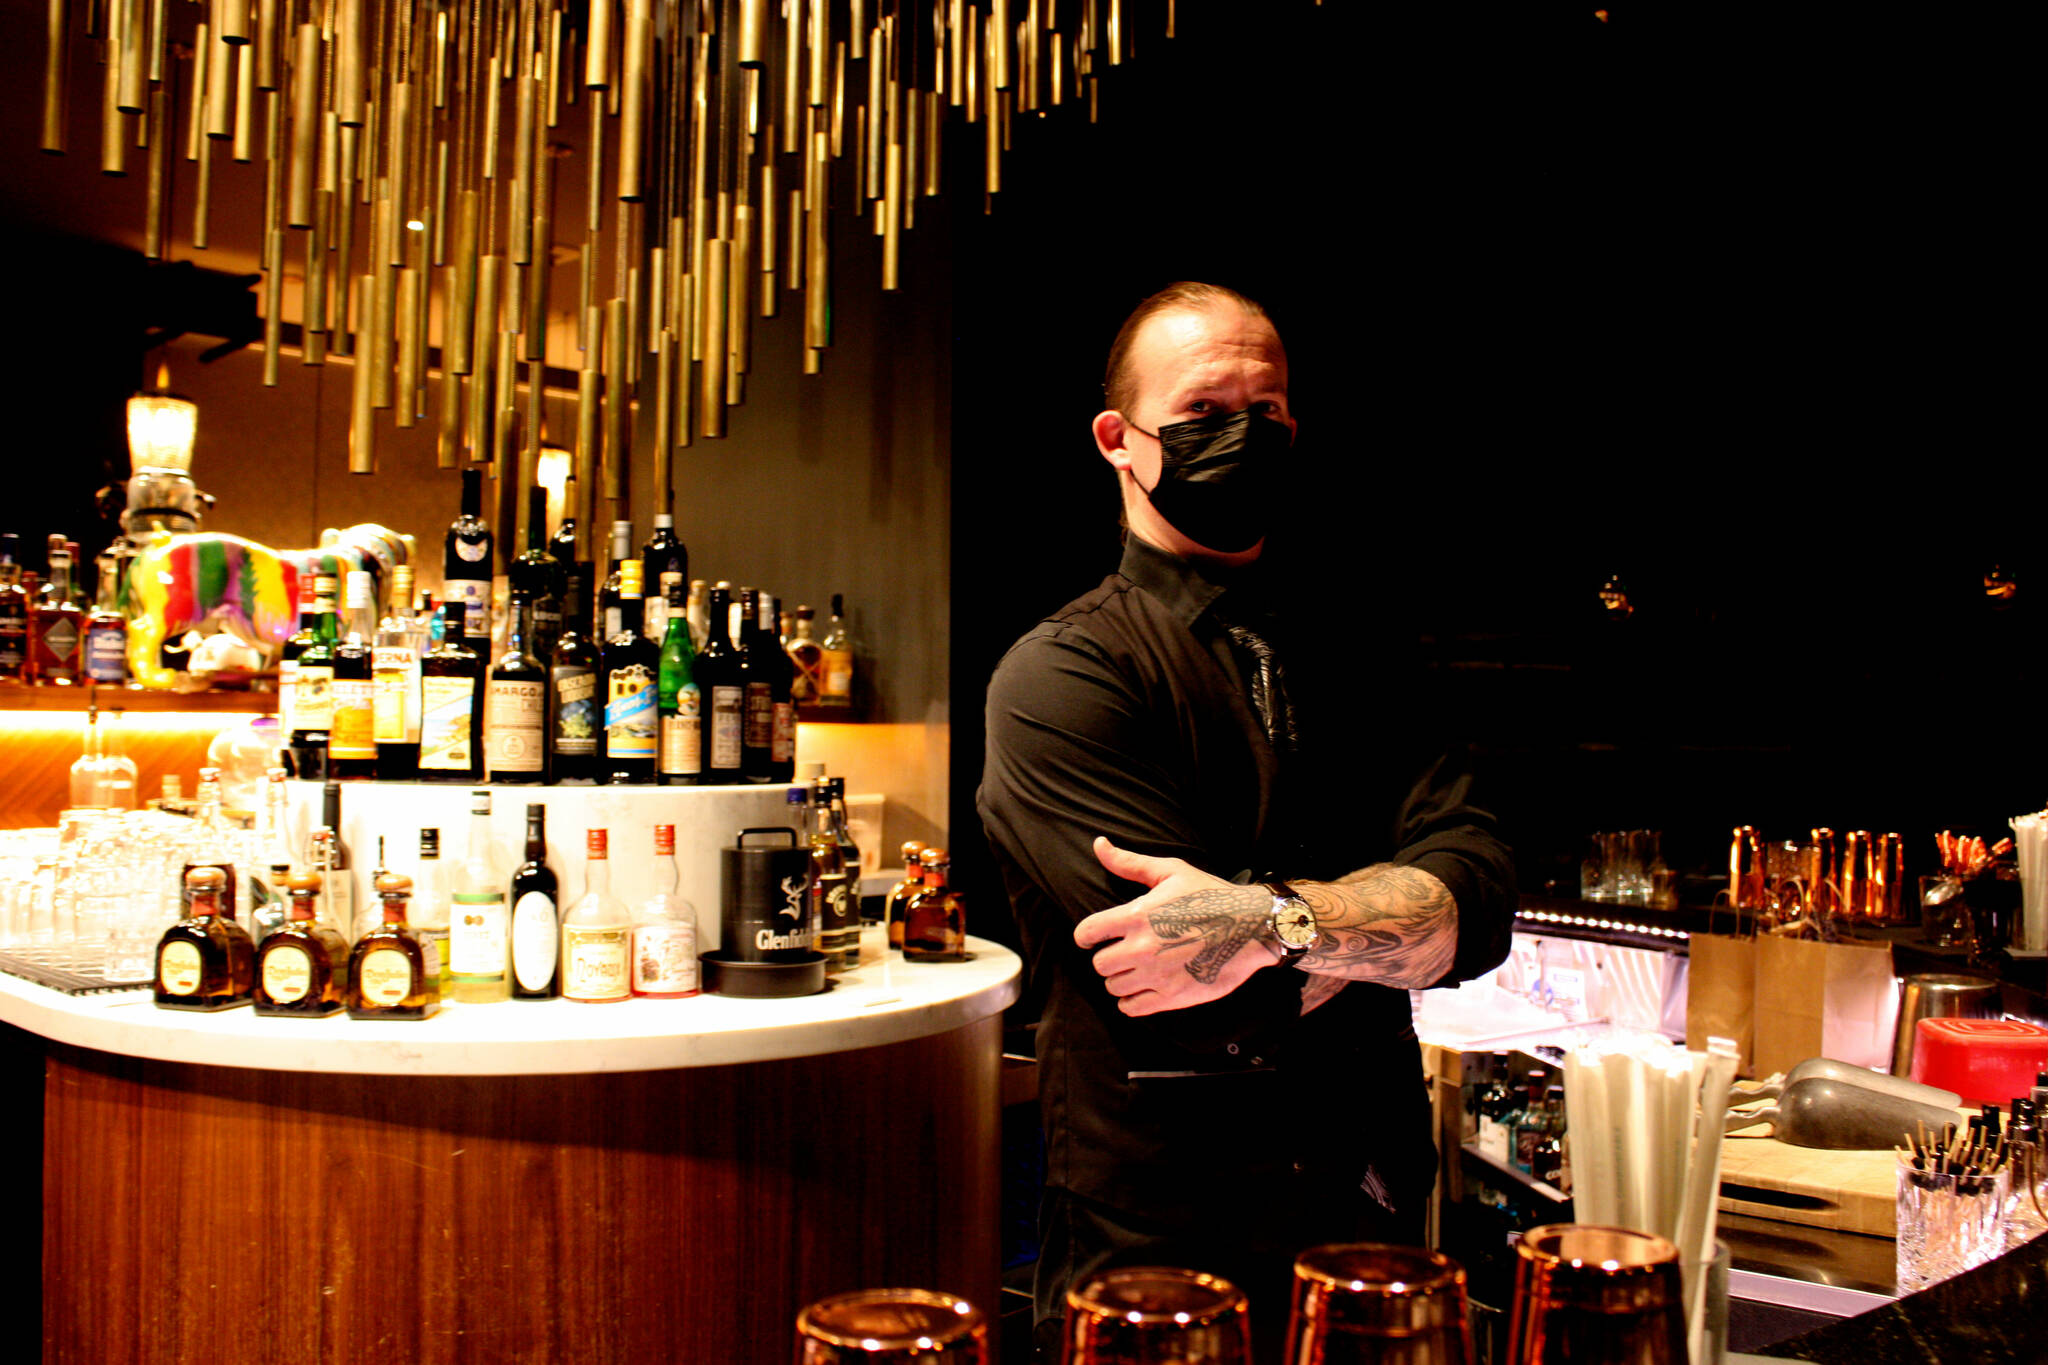 Joe Dietrich stands behind the bar top at Civility & Unrest (Photo by Cameron Sheppard/Sound Publishing)